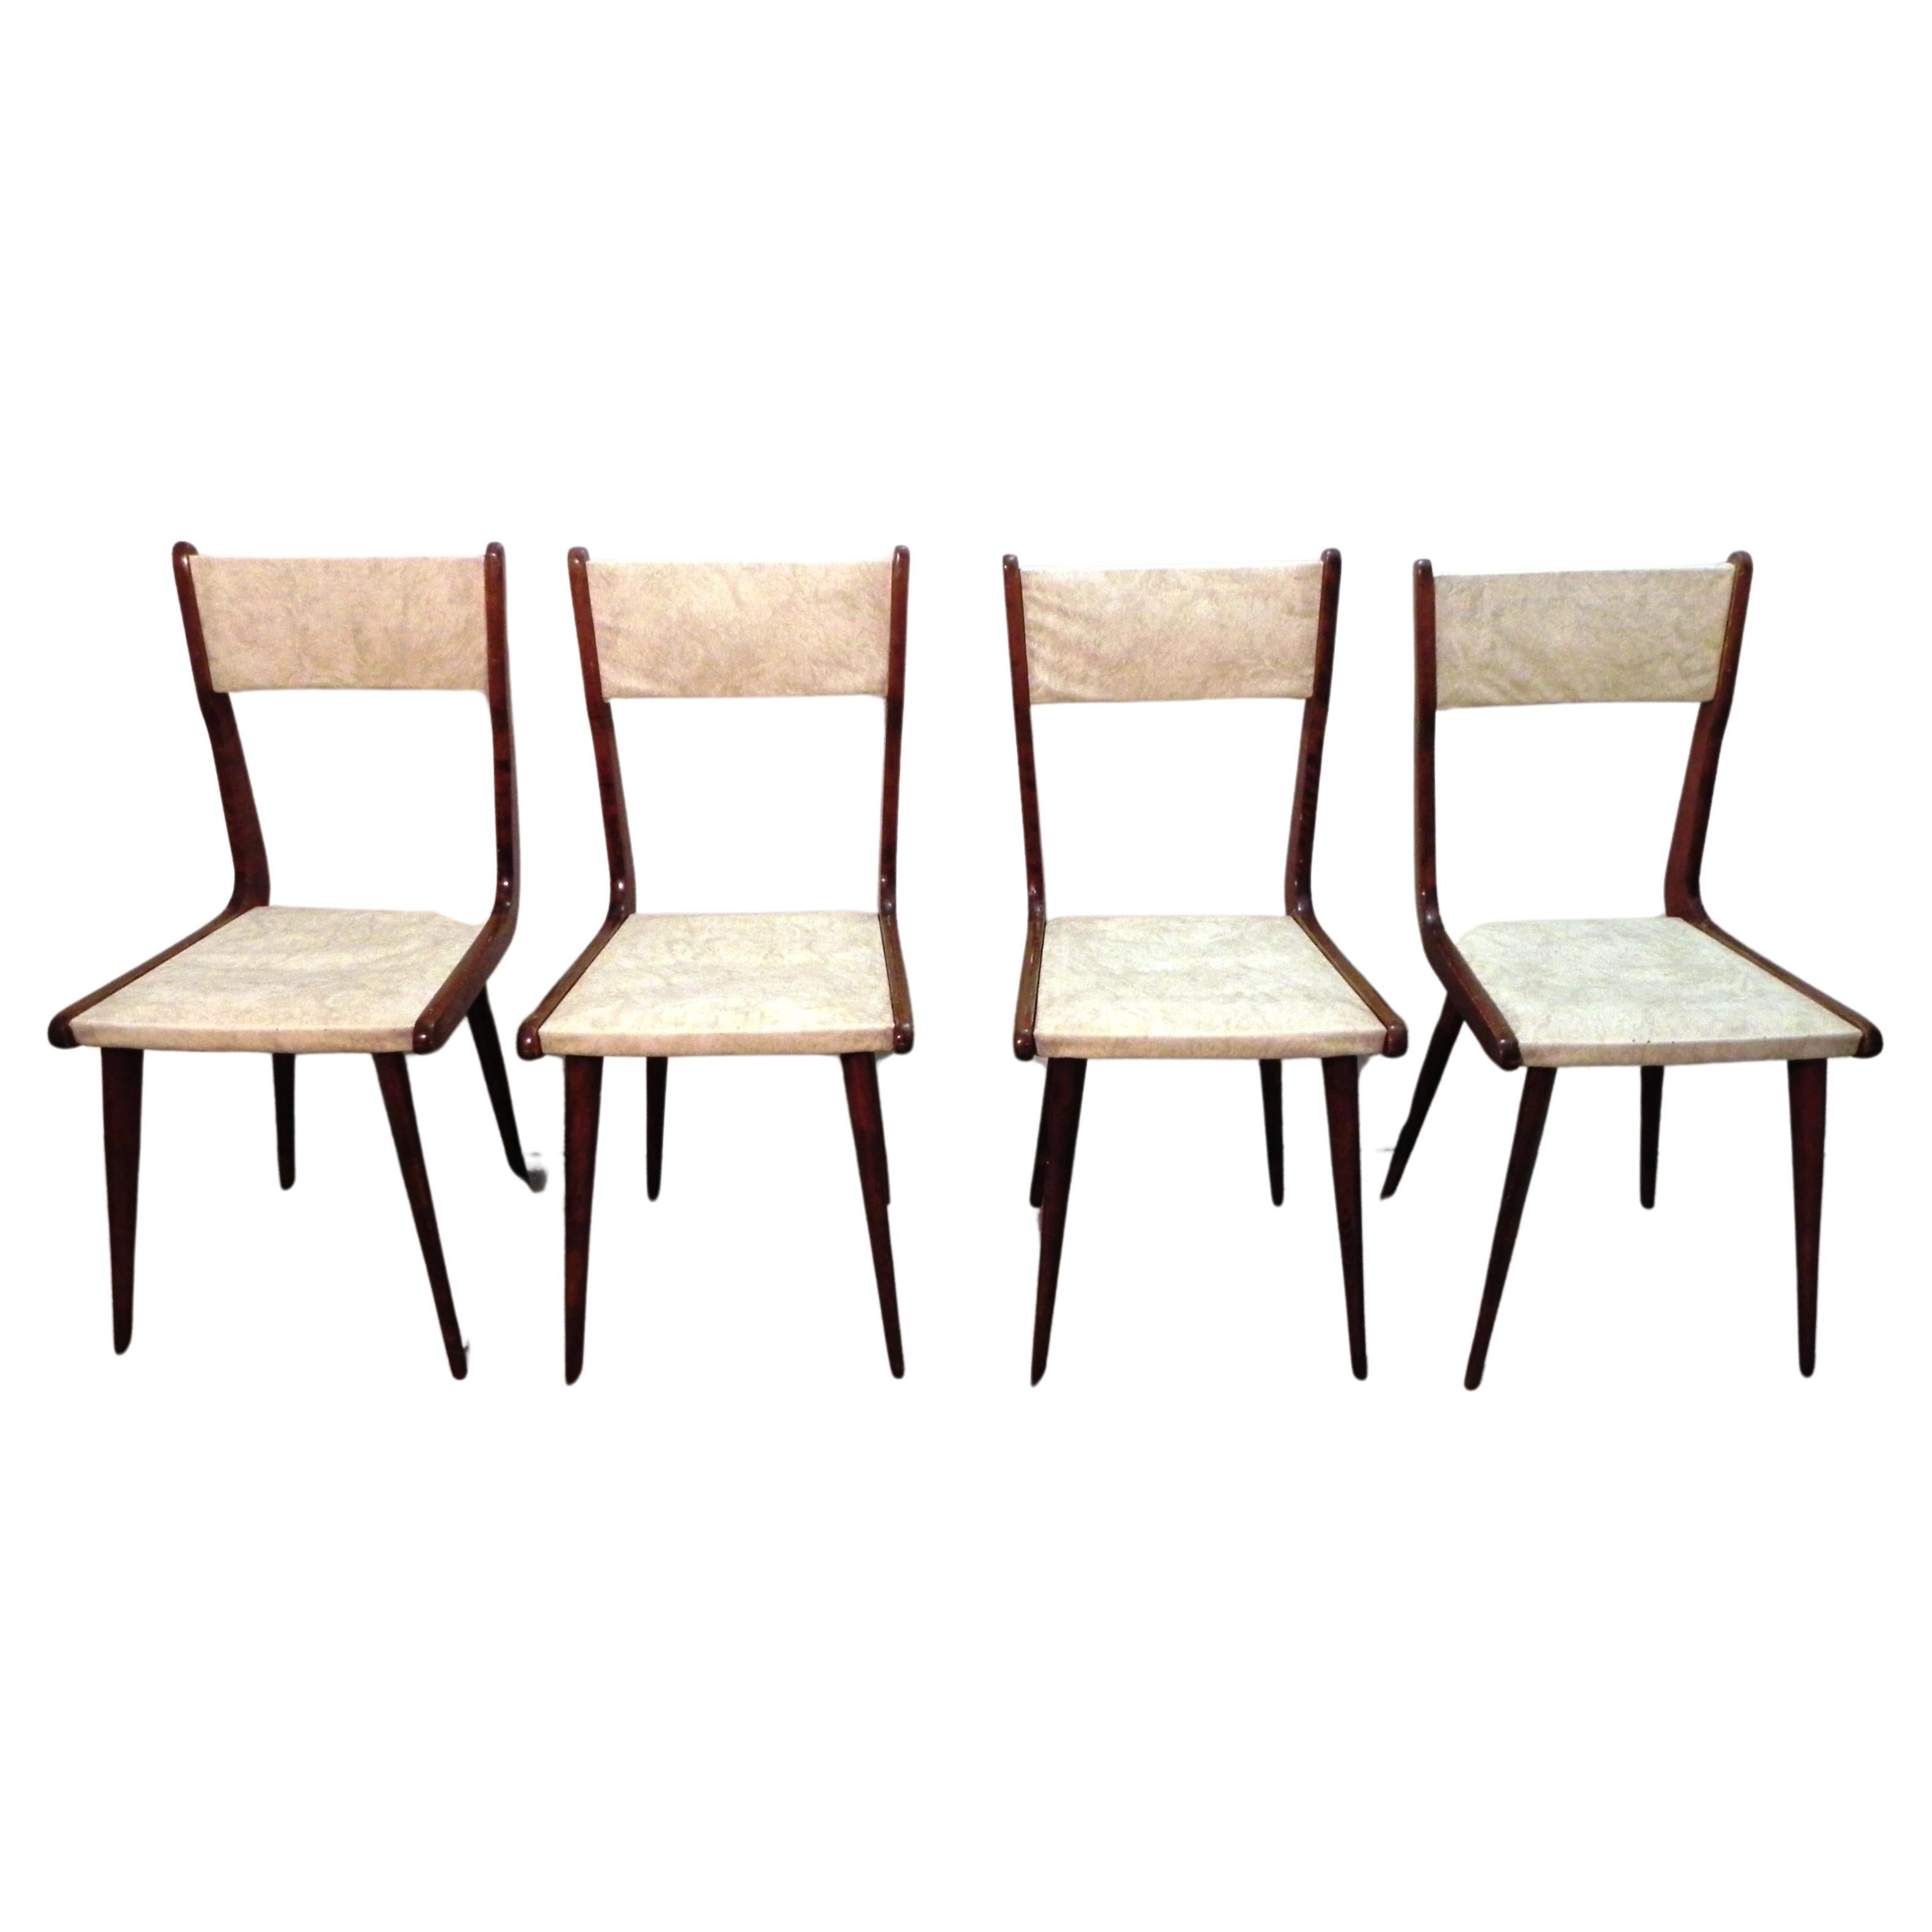 4 chairs 60s For Sale